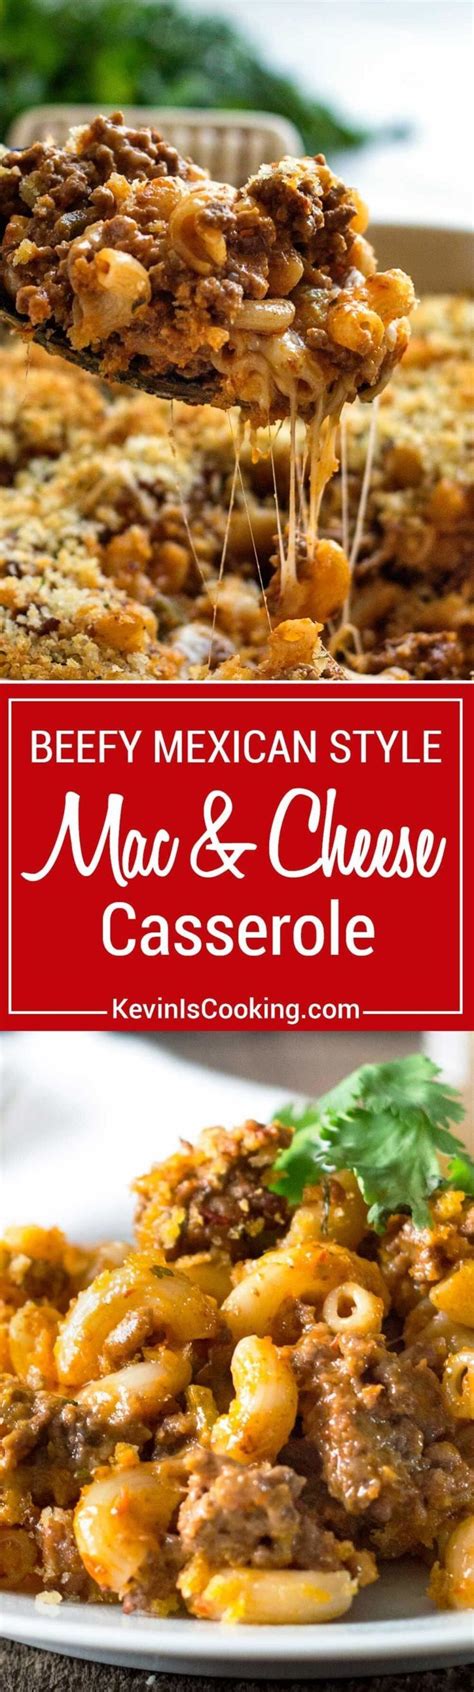 The good news is that you can start with smaller amounts, and then keep tasting your sauce to see if you. This stepped up Beefy Mac and Cheese Casserole goes a step further with a Mexican salsa addition ...